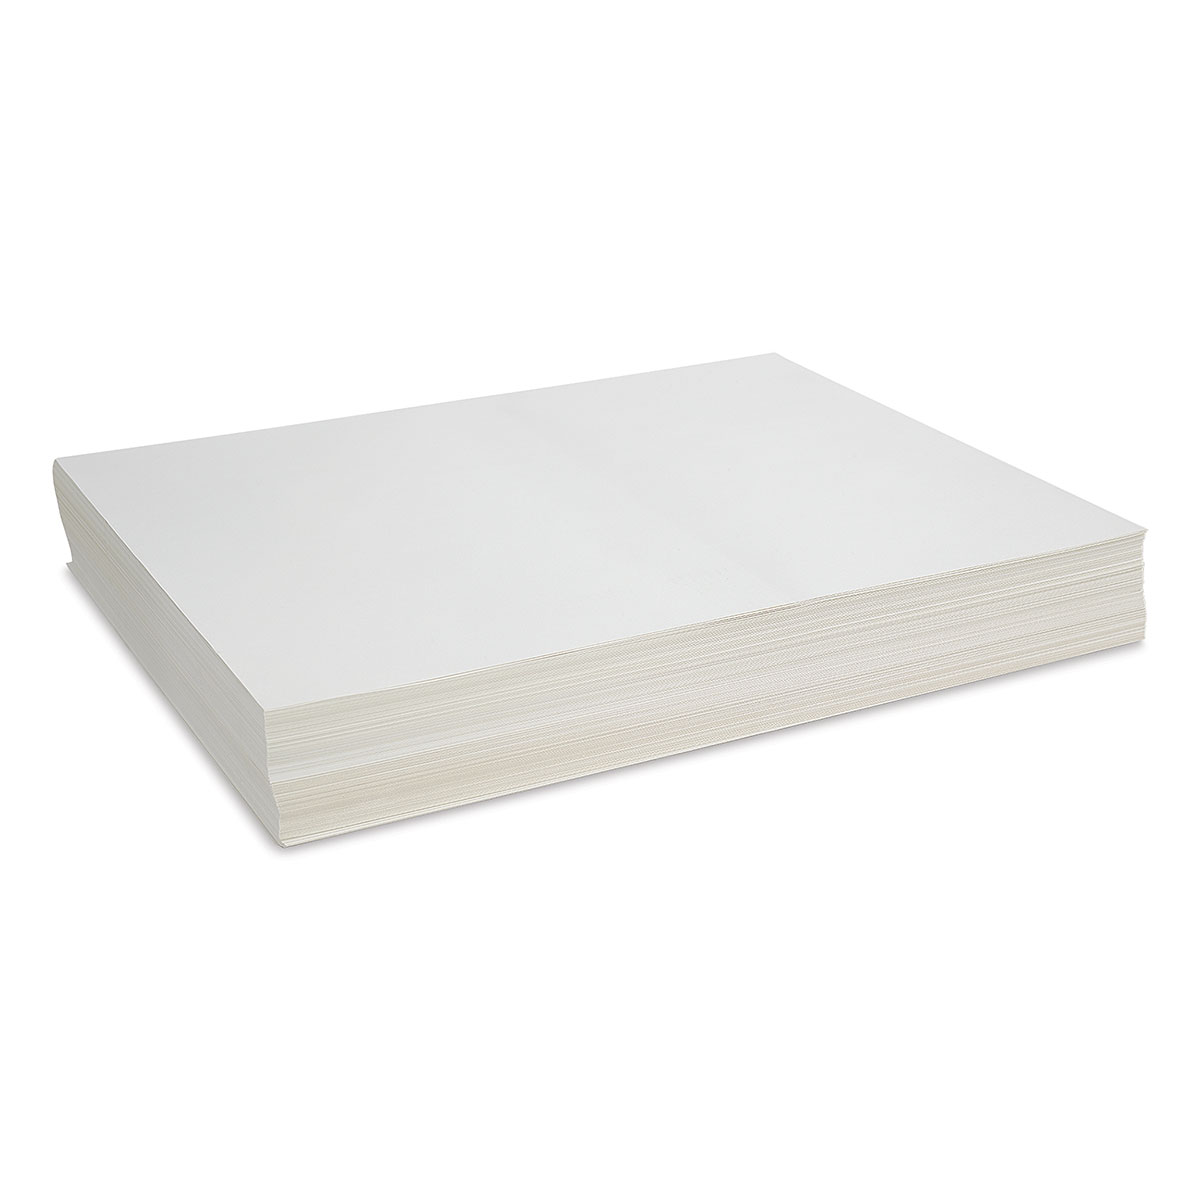 Blick Sulphite 60 lb Drawing Papers 18" x 24", White, 500 Sheets